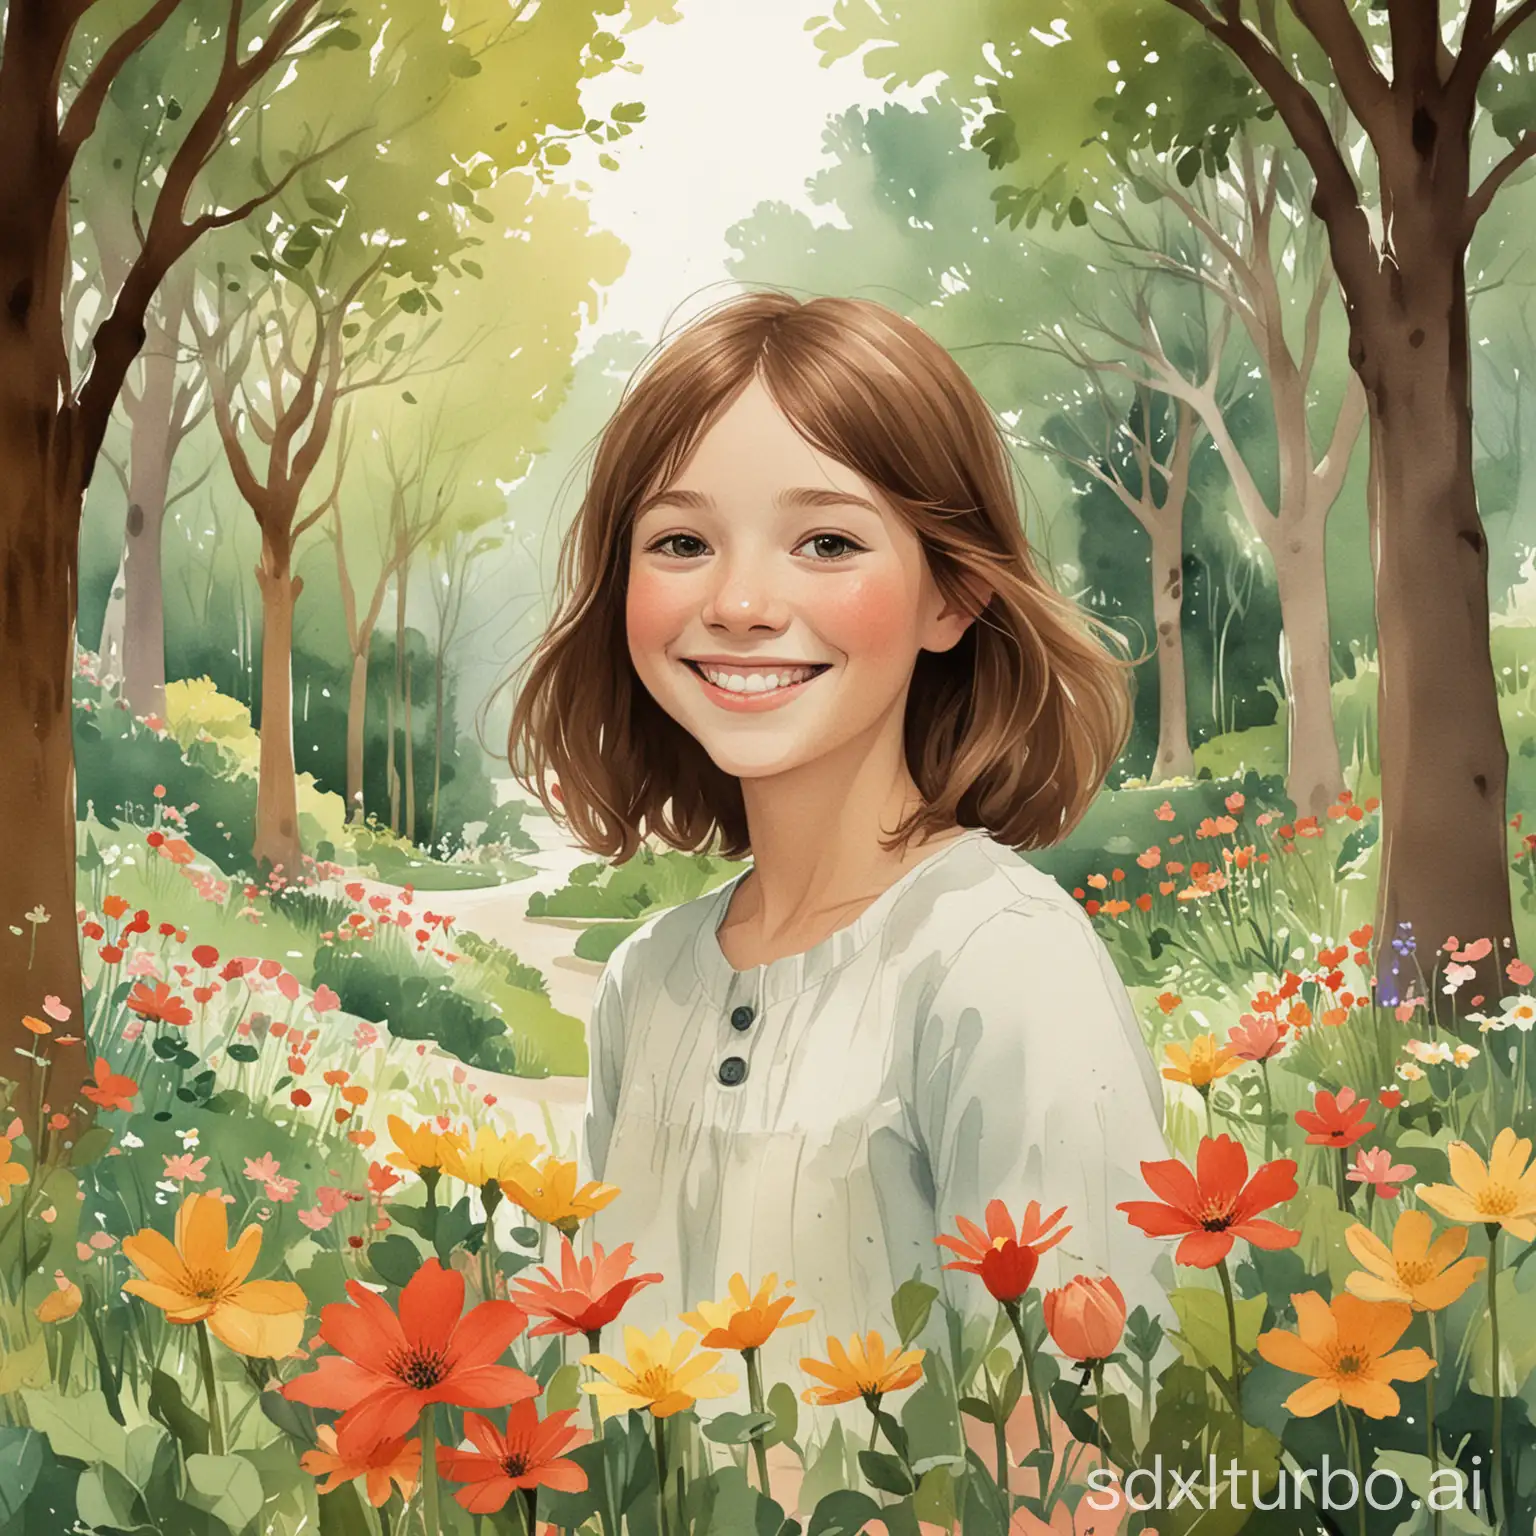 Illustration: Kate Sessions smiling among lush green trees and colorful flowers in Balboa Park.   Title: "Mother of Balboa Park"   Subtitle: " A Story of Nature's Love" or " A Tale of Nature's Love" or “The Story of Kate Sessions”.  masterpiece, illustration, best quality, children's book, watercolor, close-up -1 little girl with brown hair smiling. Style of Jon Klassen